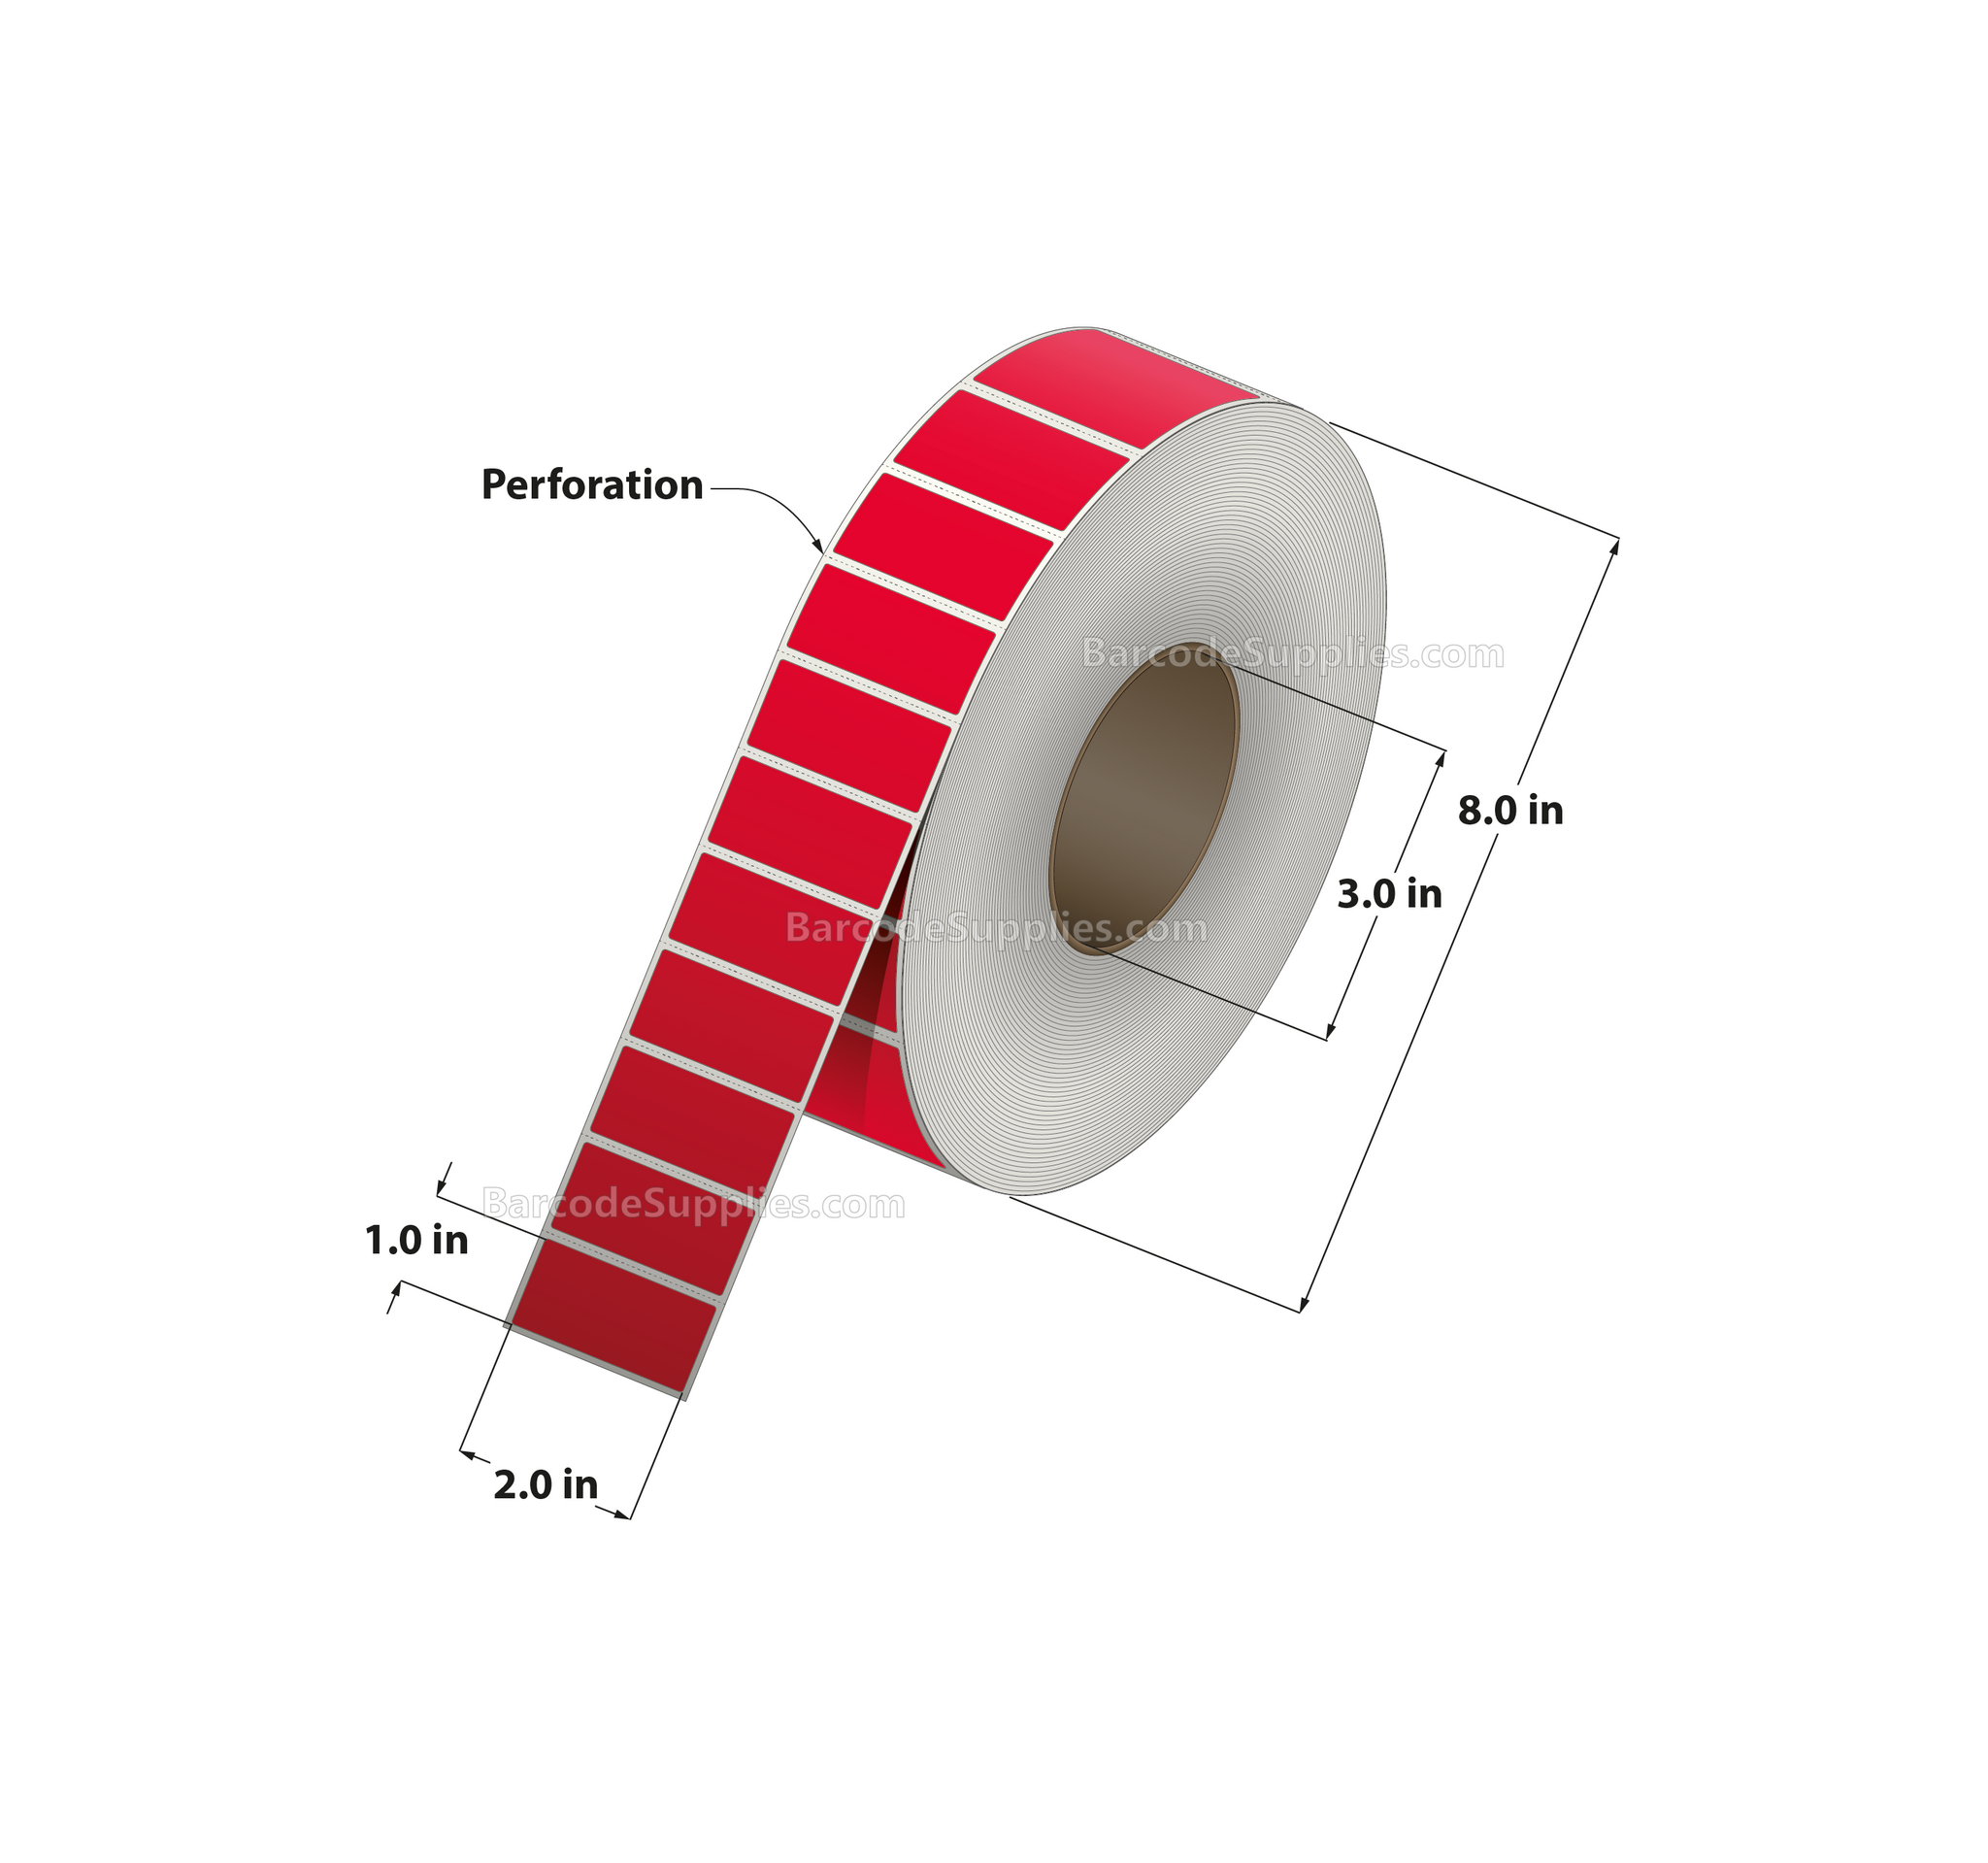 2 x 1 Thermal Transfer 032 Red Labels With Permanent Adhesive - Perforated - 5500 Labels Per Roll - Carton Of 8 Rolls - 44000 Labels Total - MPN: RFC-2-1-5500-RD